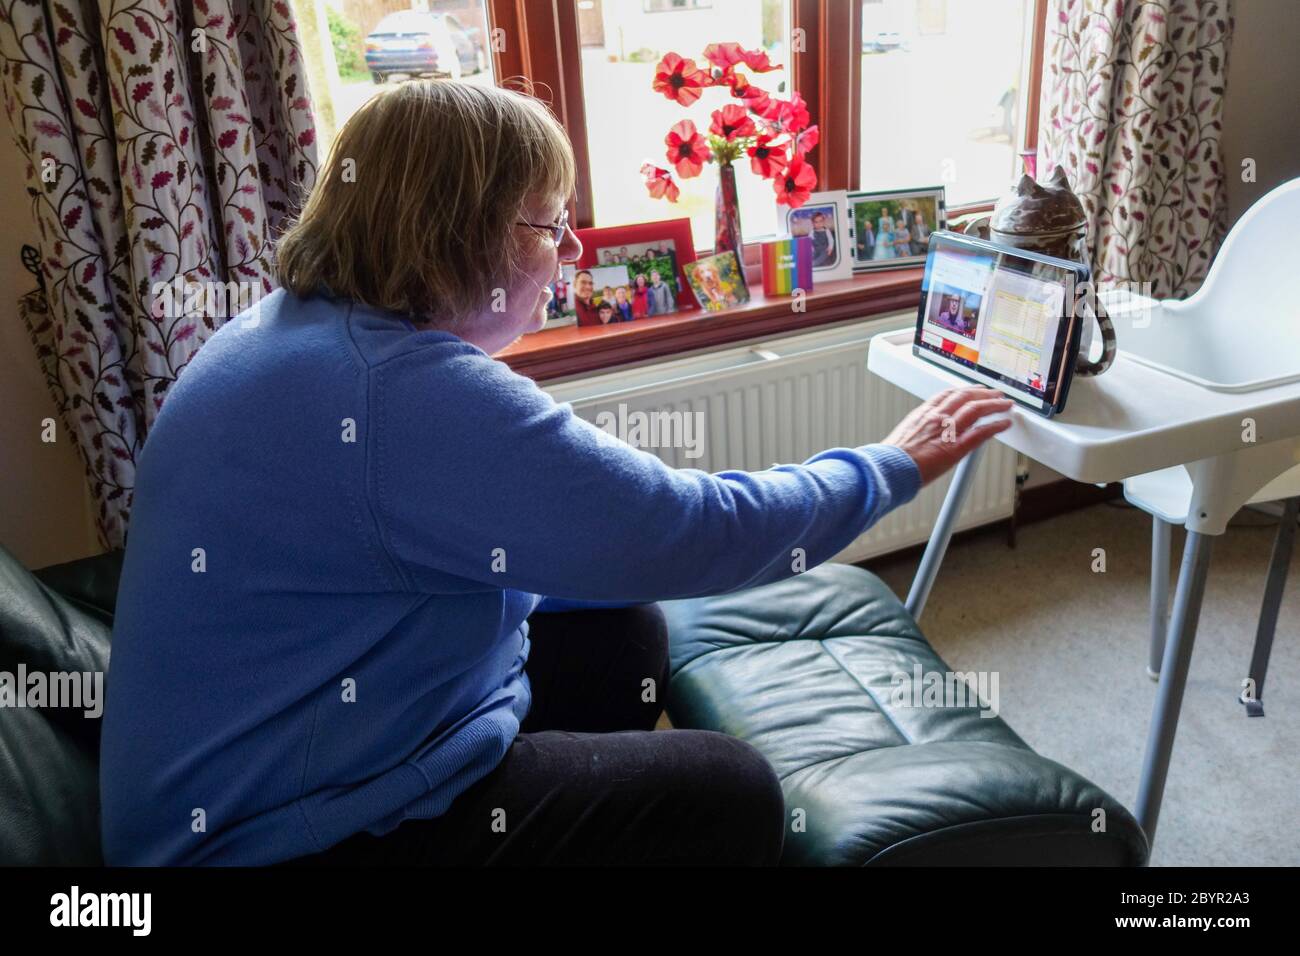 Woman in her 60th using video video call (Zoom) with relatives during Coronavirus crisis Stock Photo